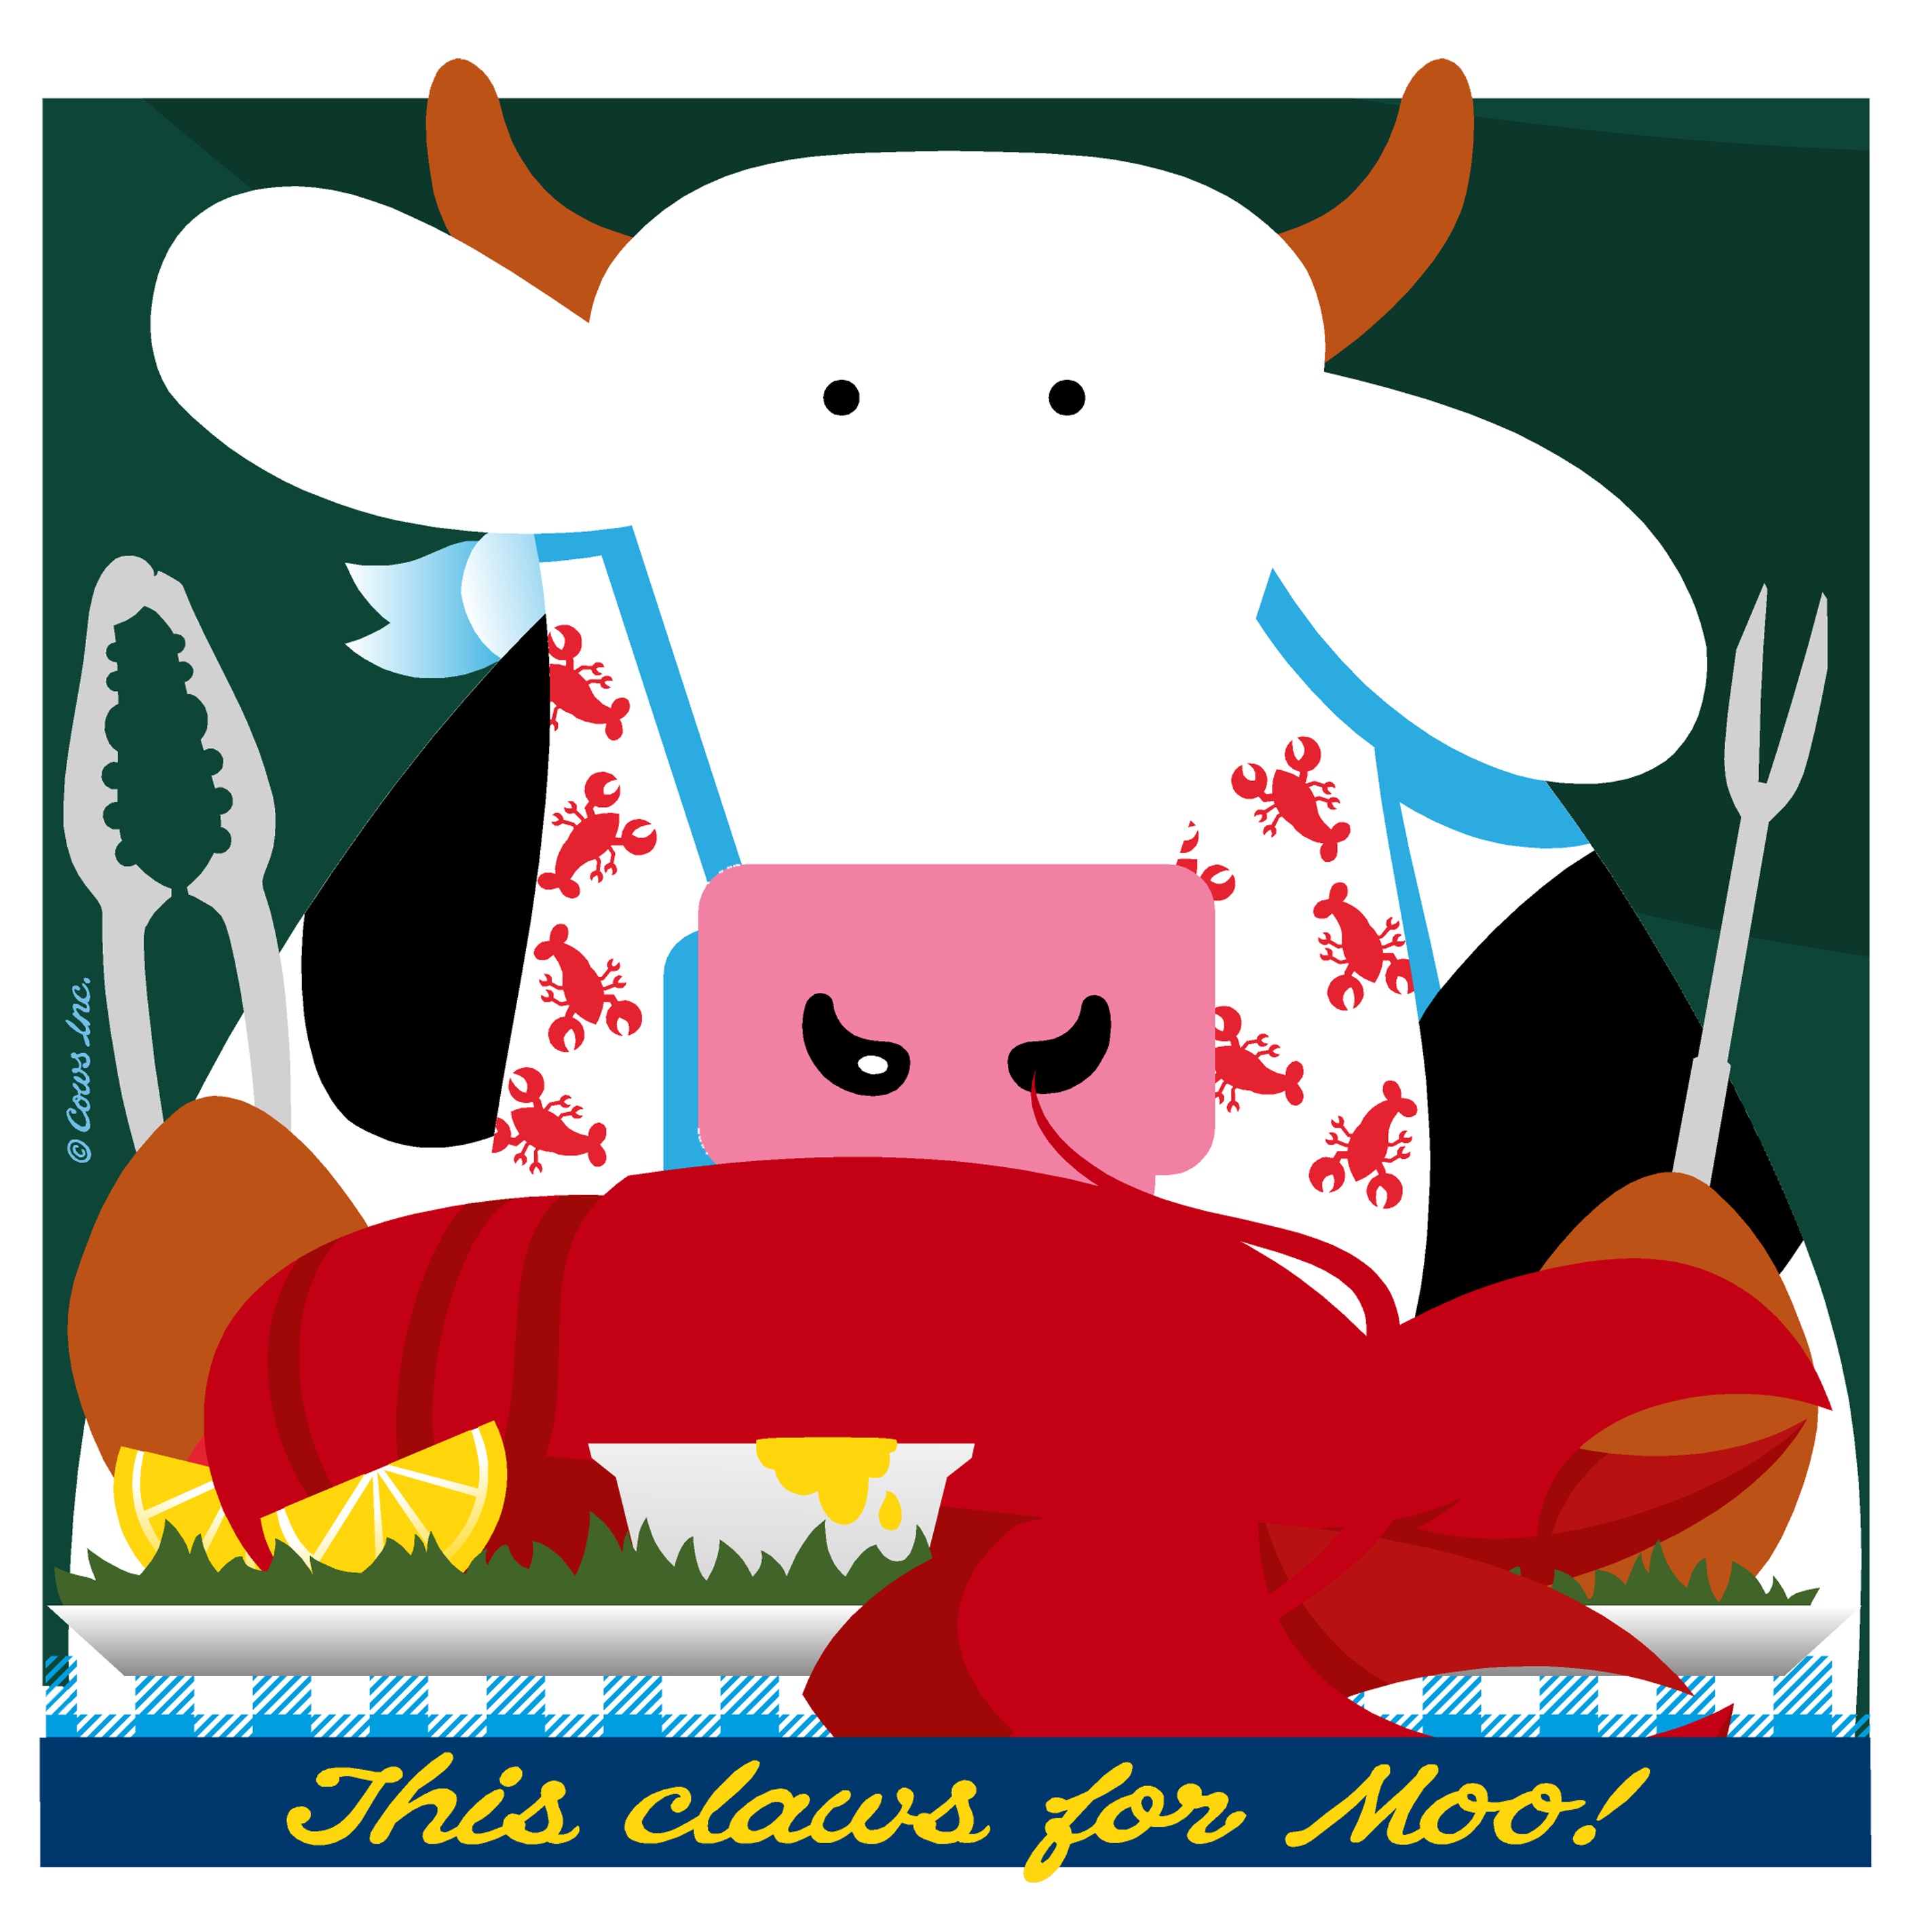 LOBSTER CLASSIC T IMAGE